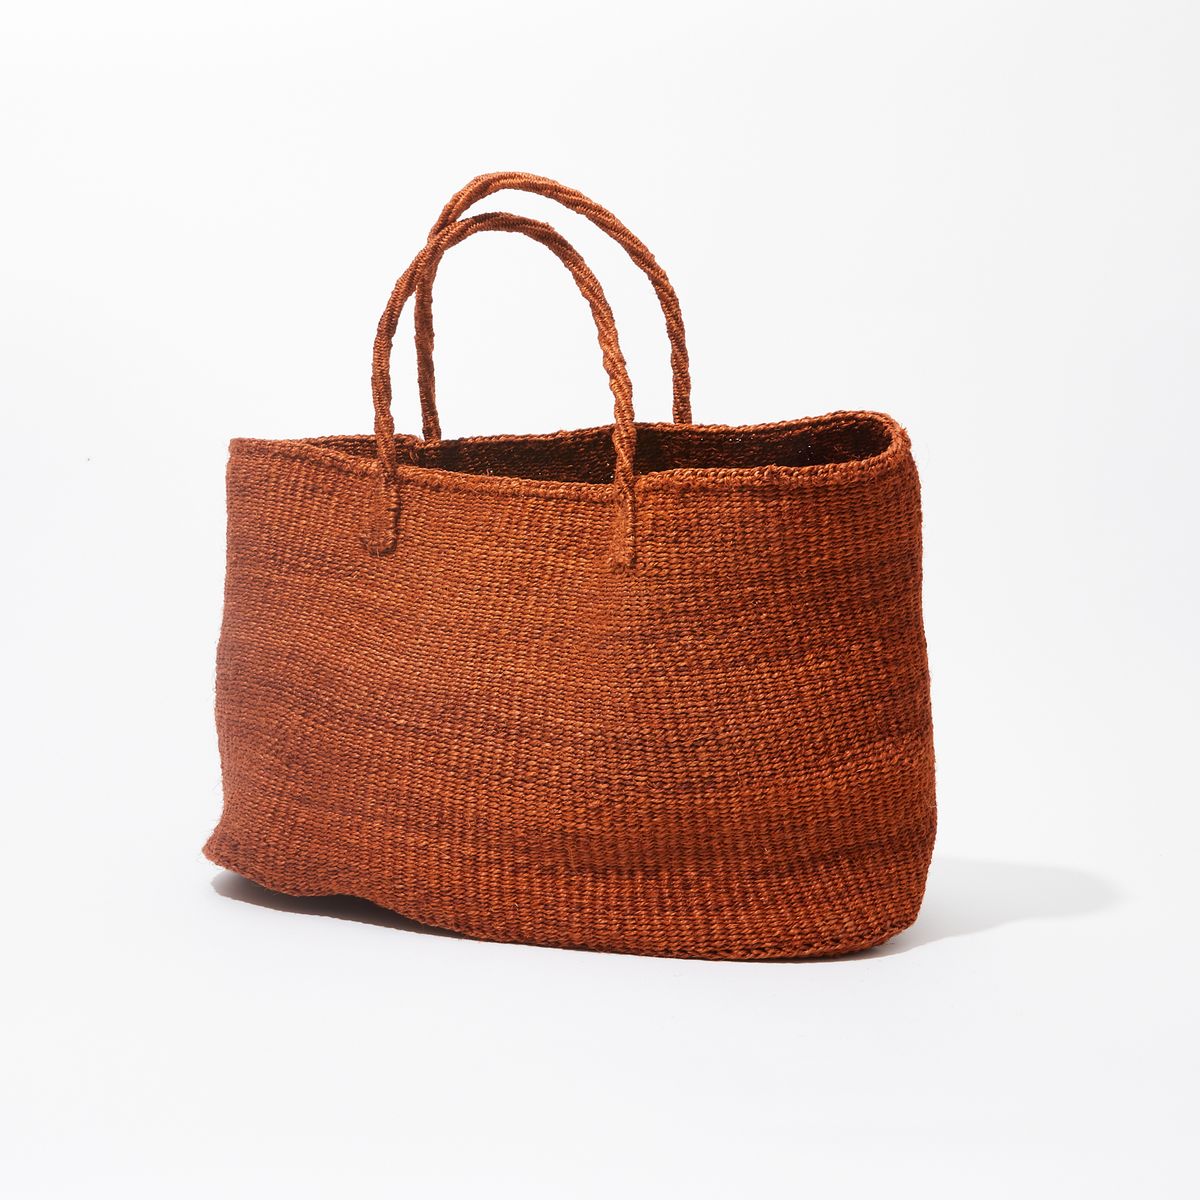 Large sisal woven bag with two handles resting on a white surface